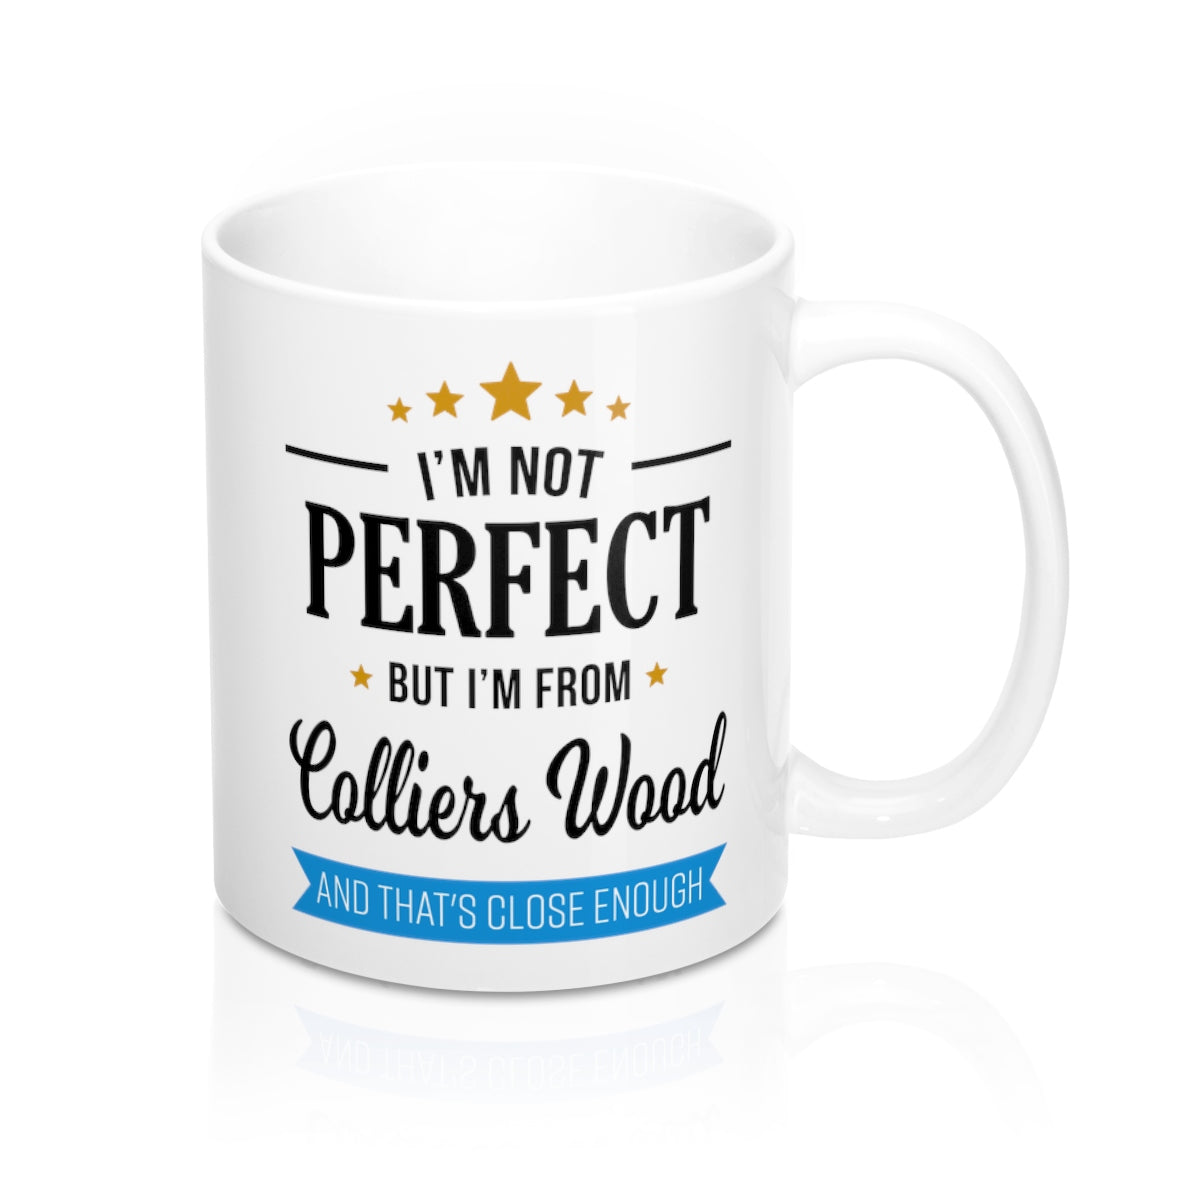 I'm Not Perfect But I'm From Colliers Wood Mug